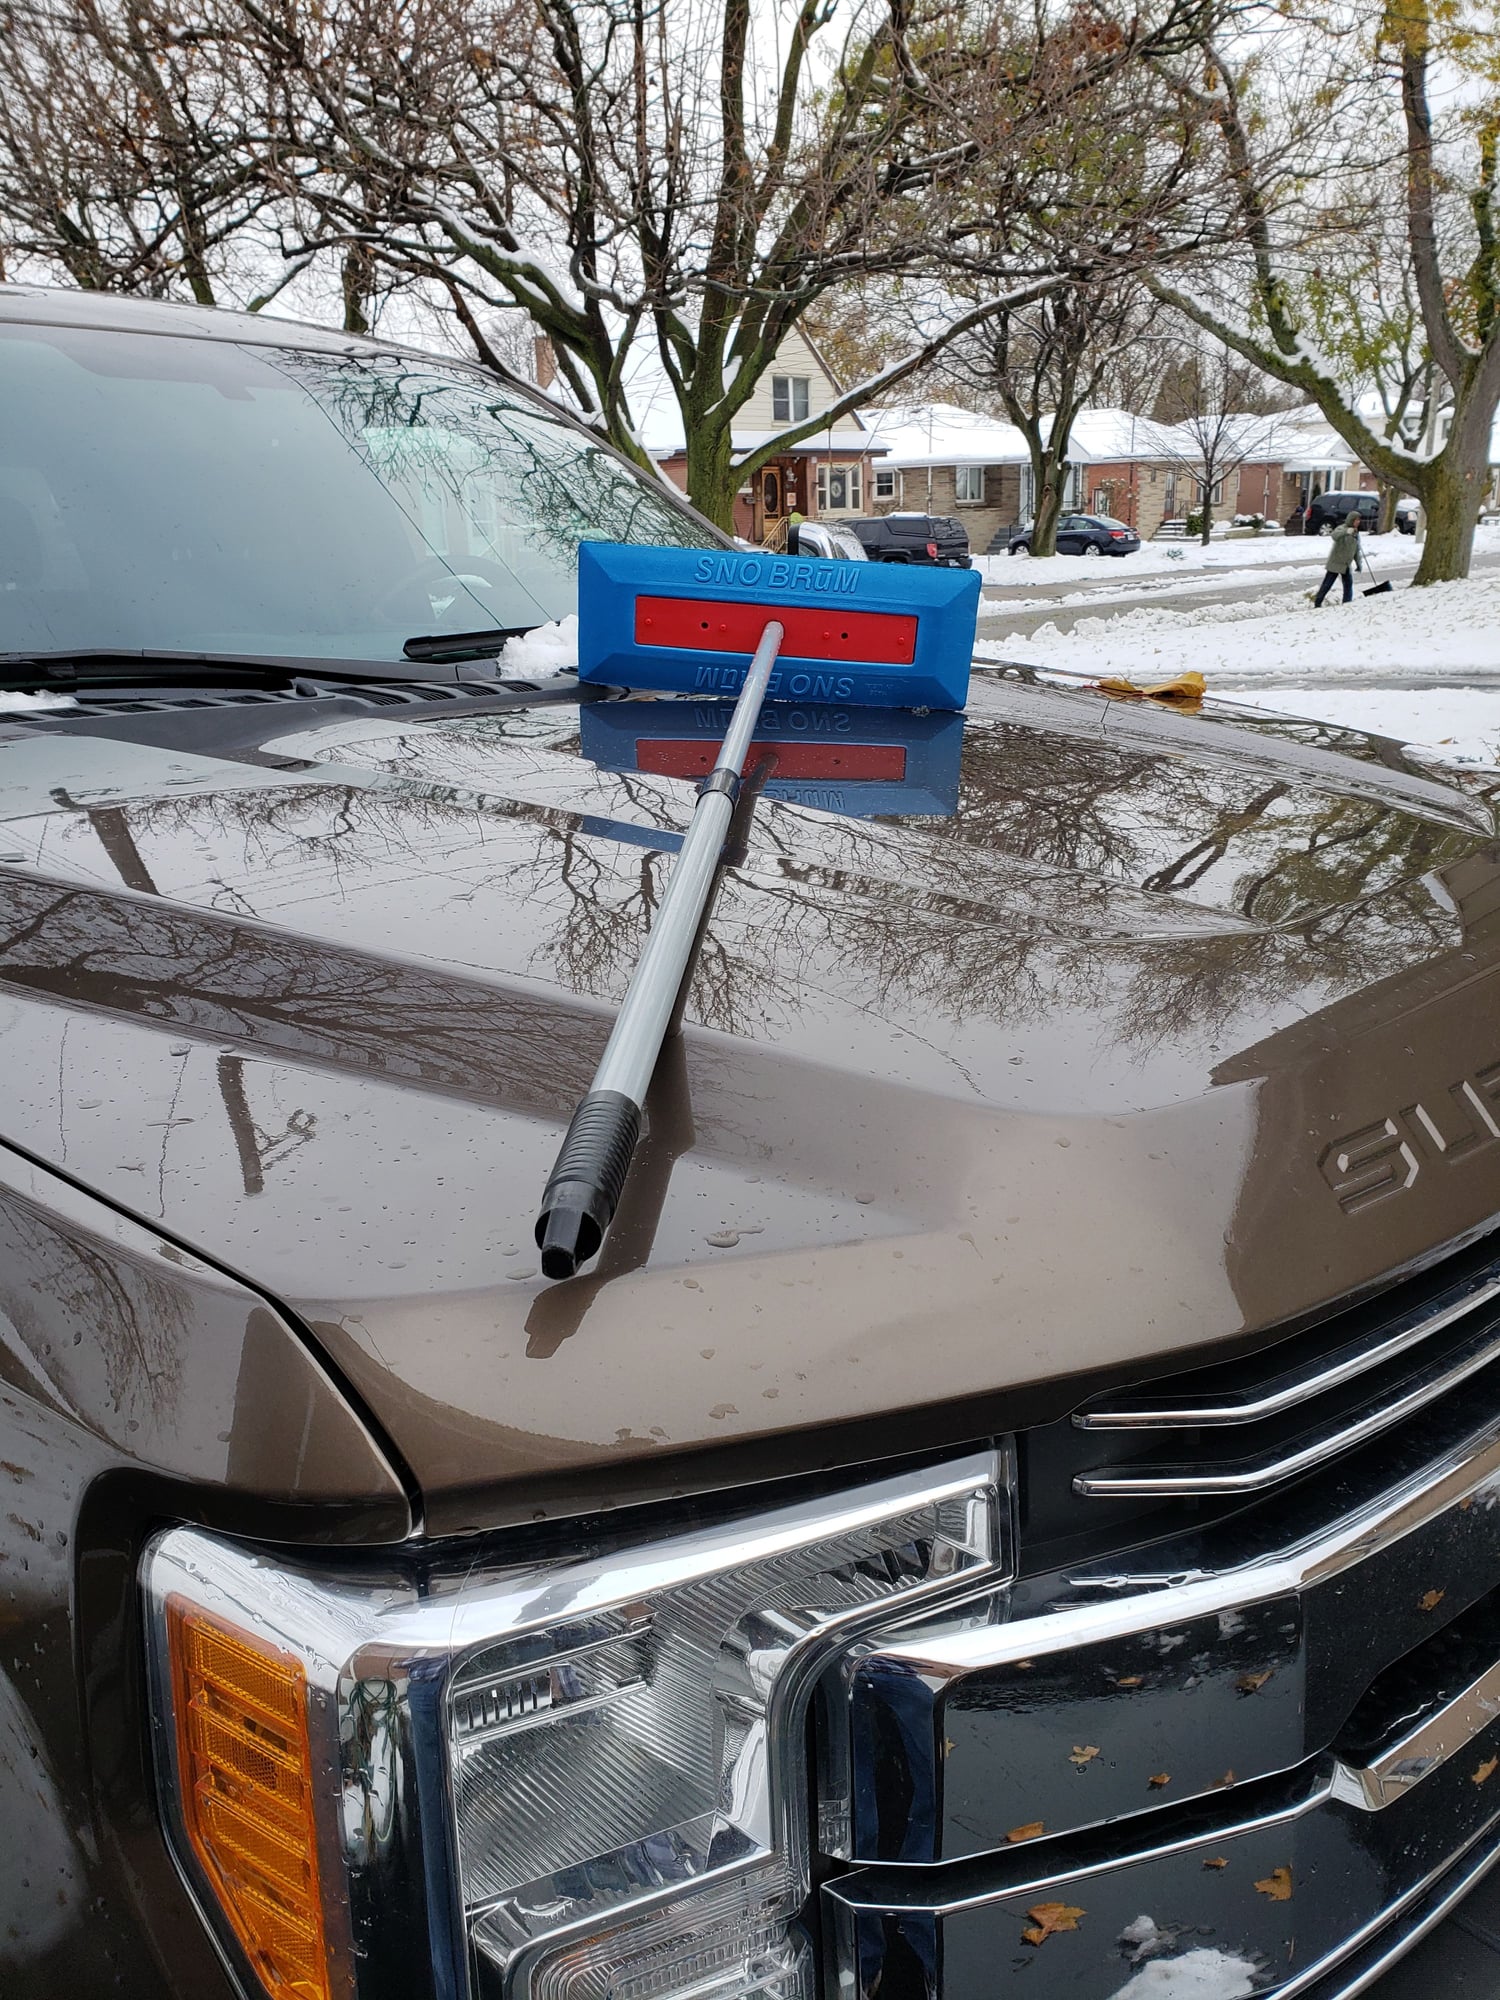 The Auto Snow Brum - Remove snow from cars with a snow broom